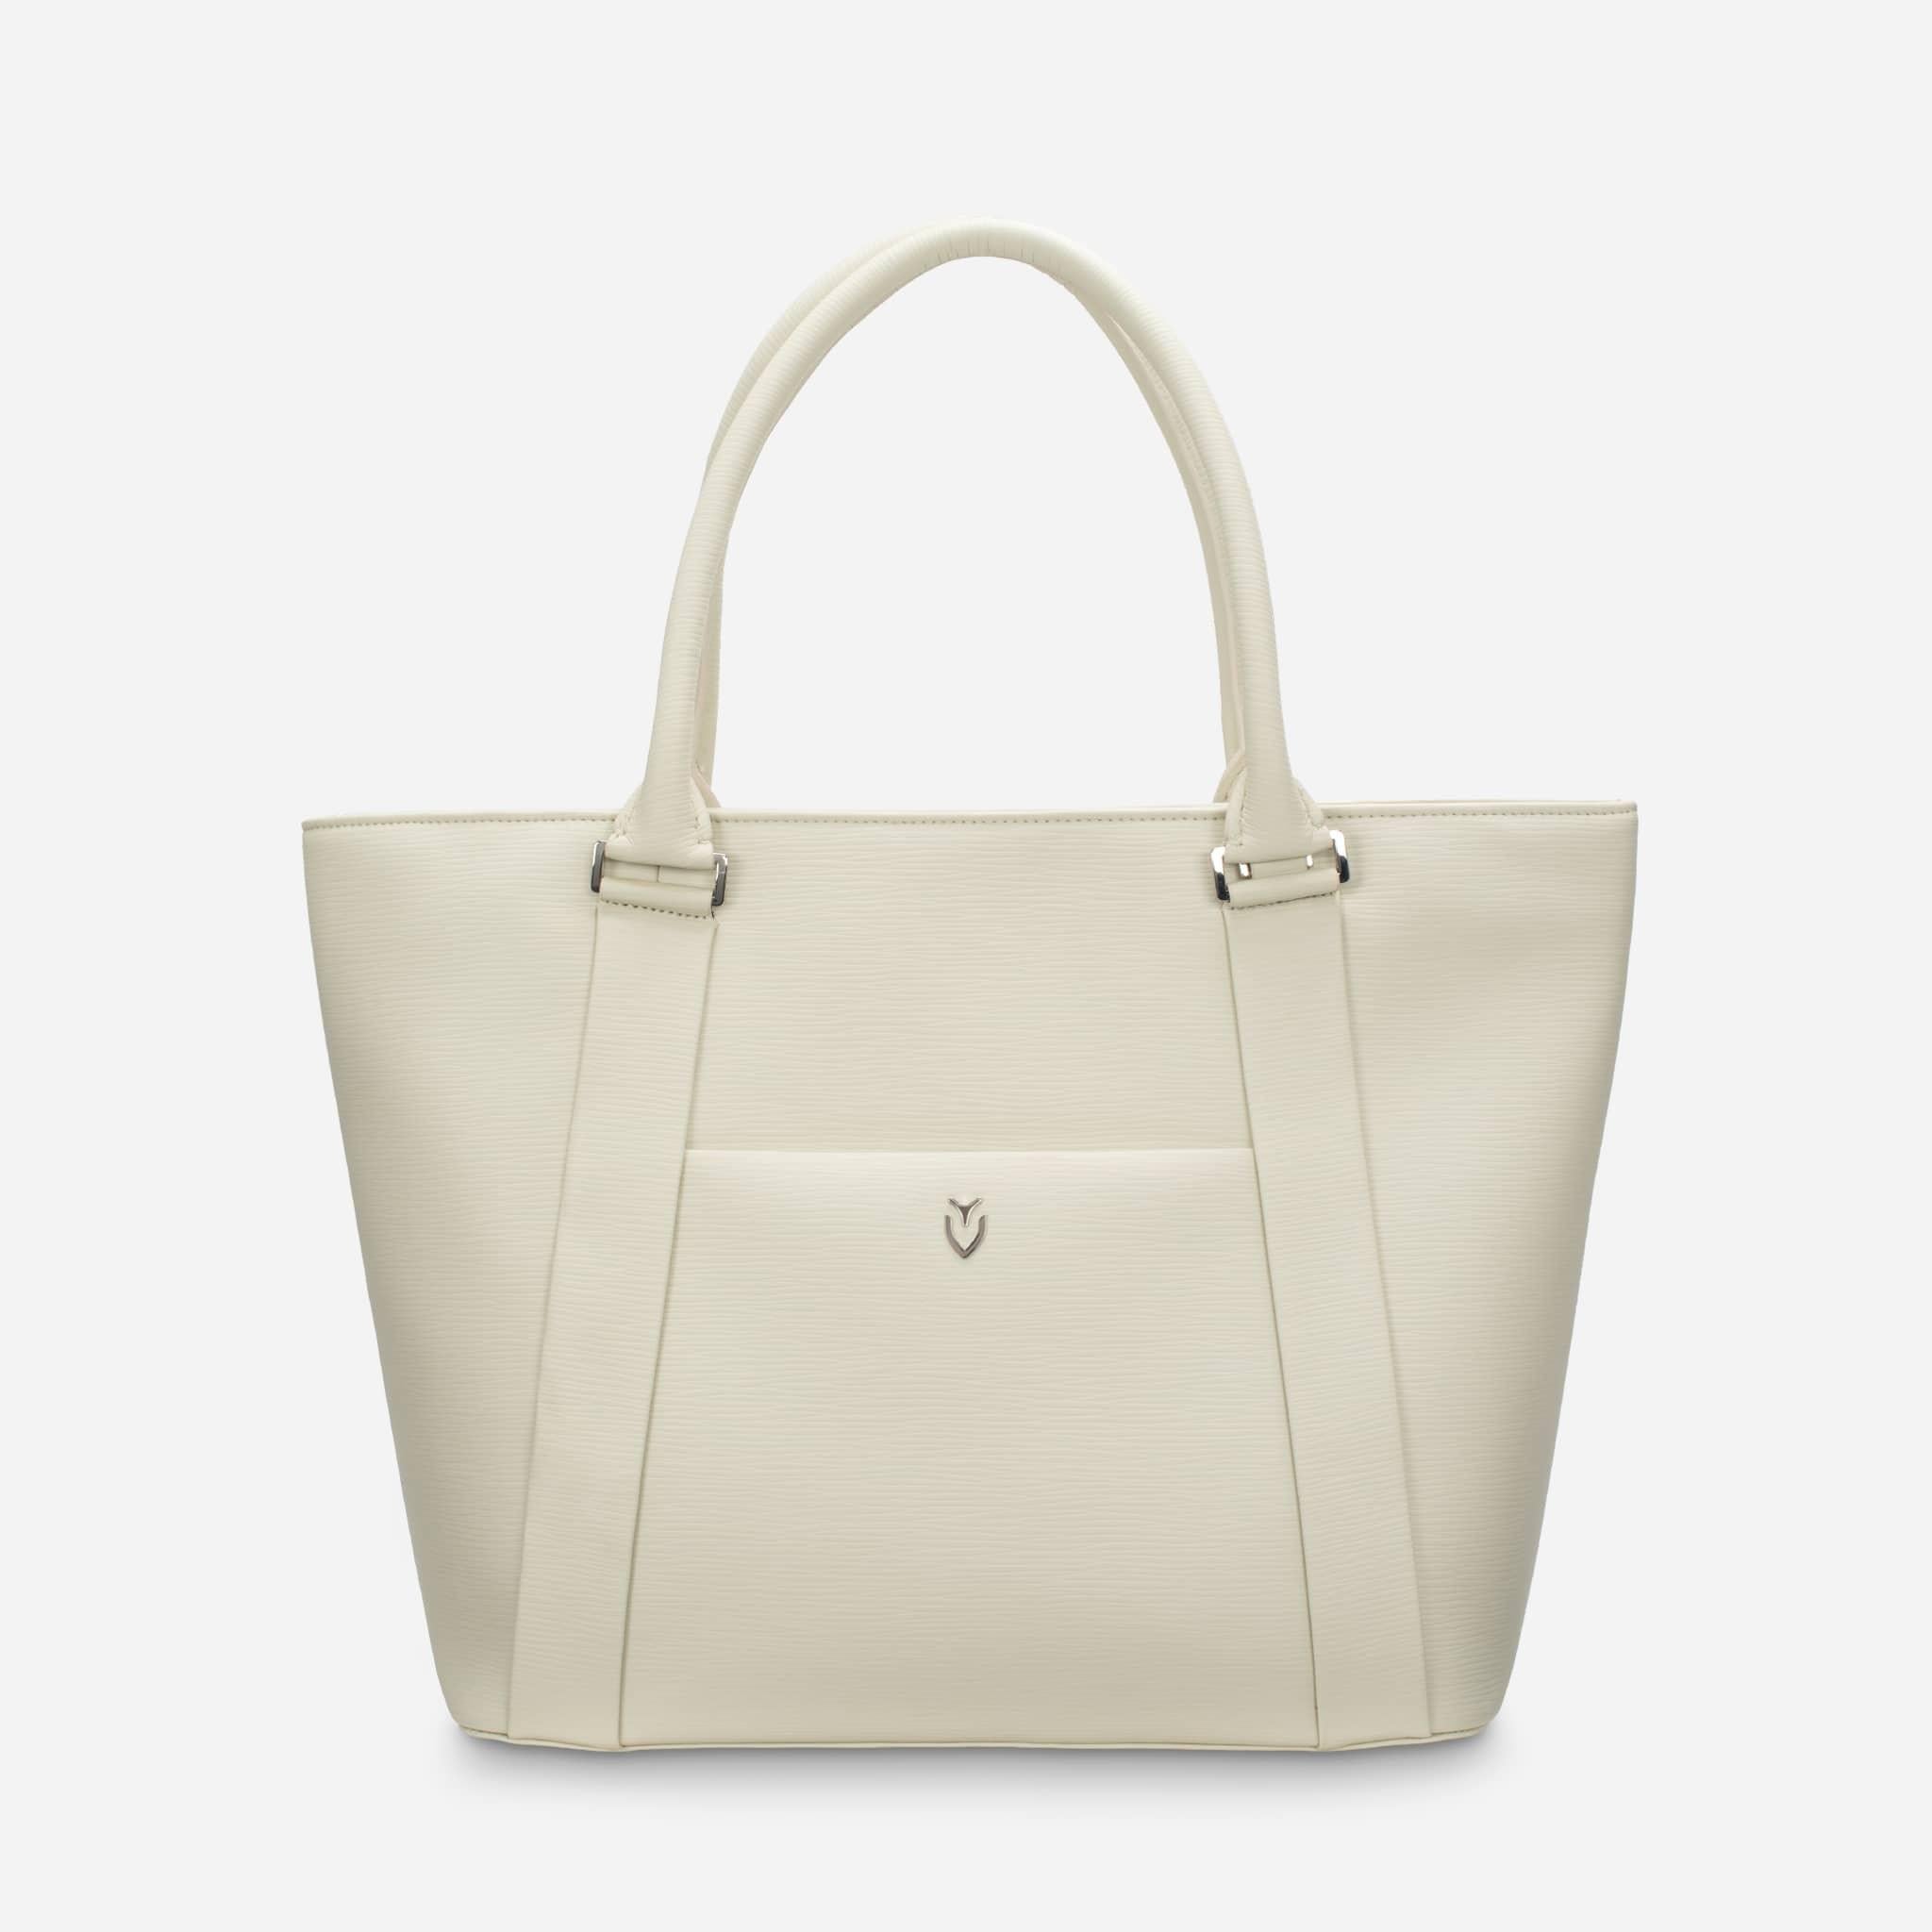 Tote Bags | Luxury Tote Bags | VESSEL Lifestyle